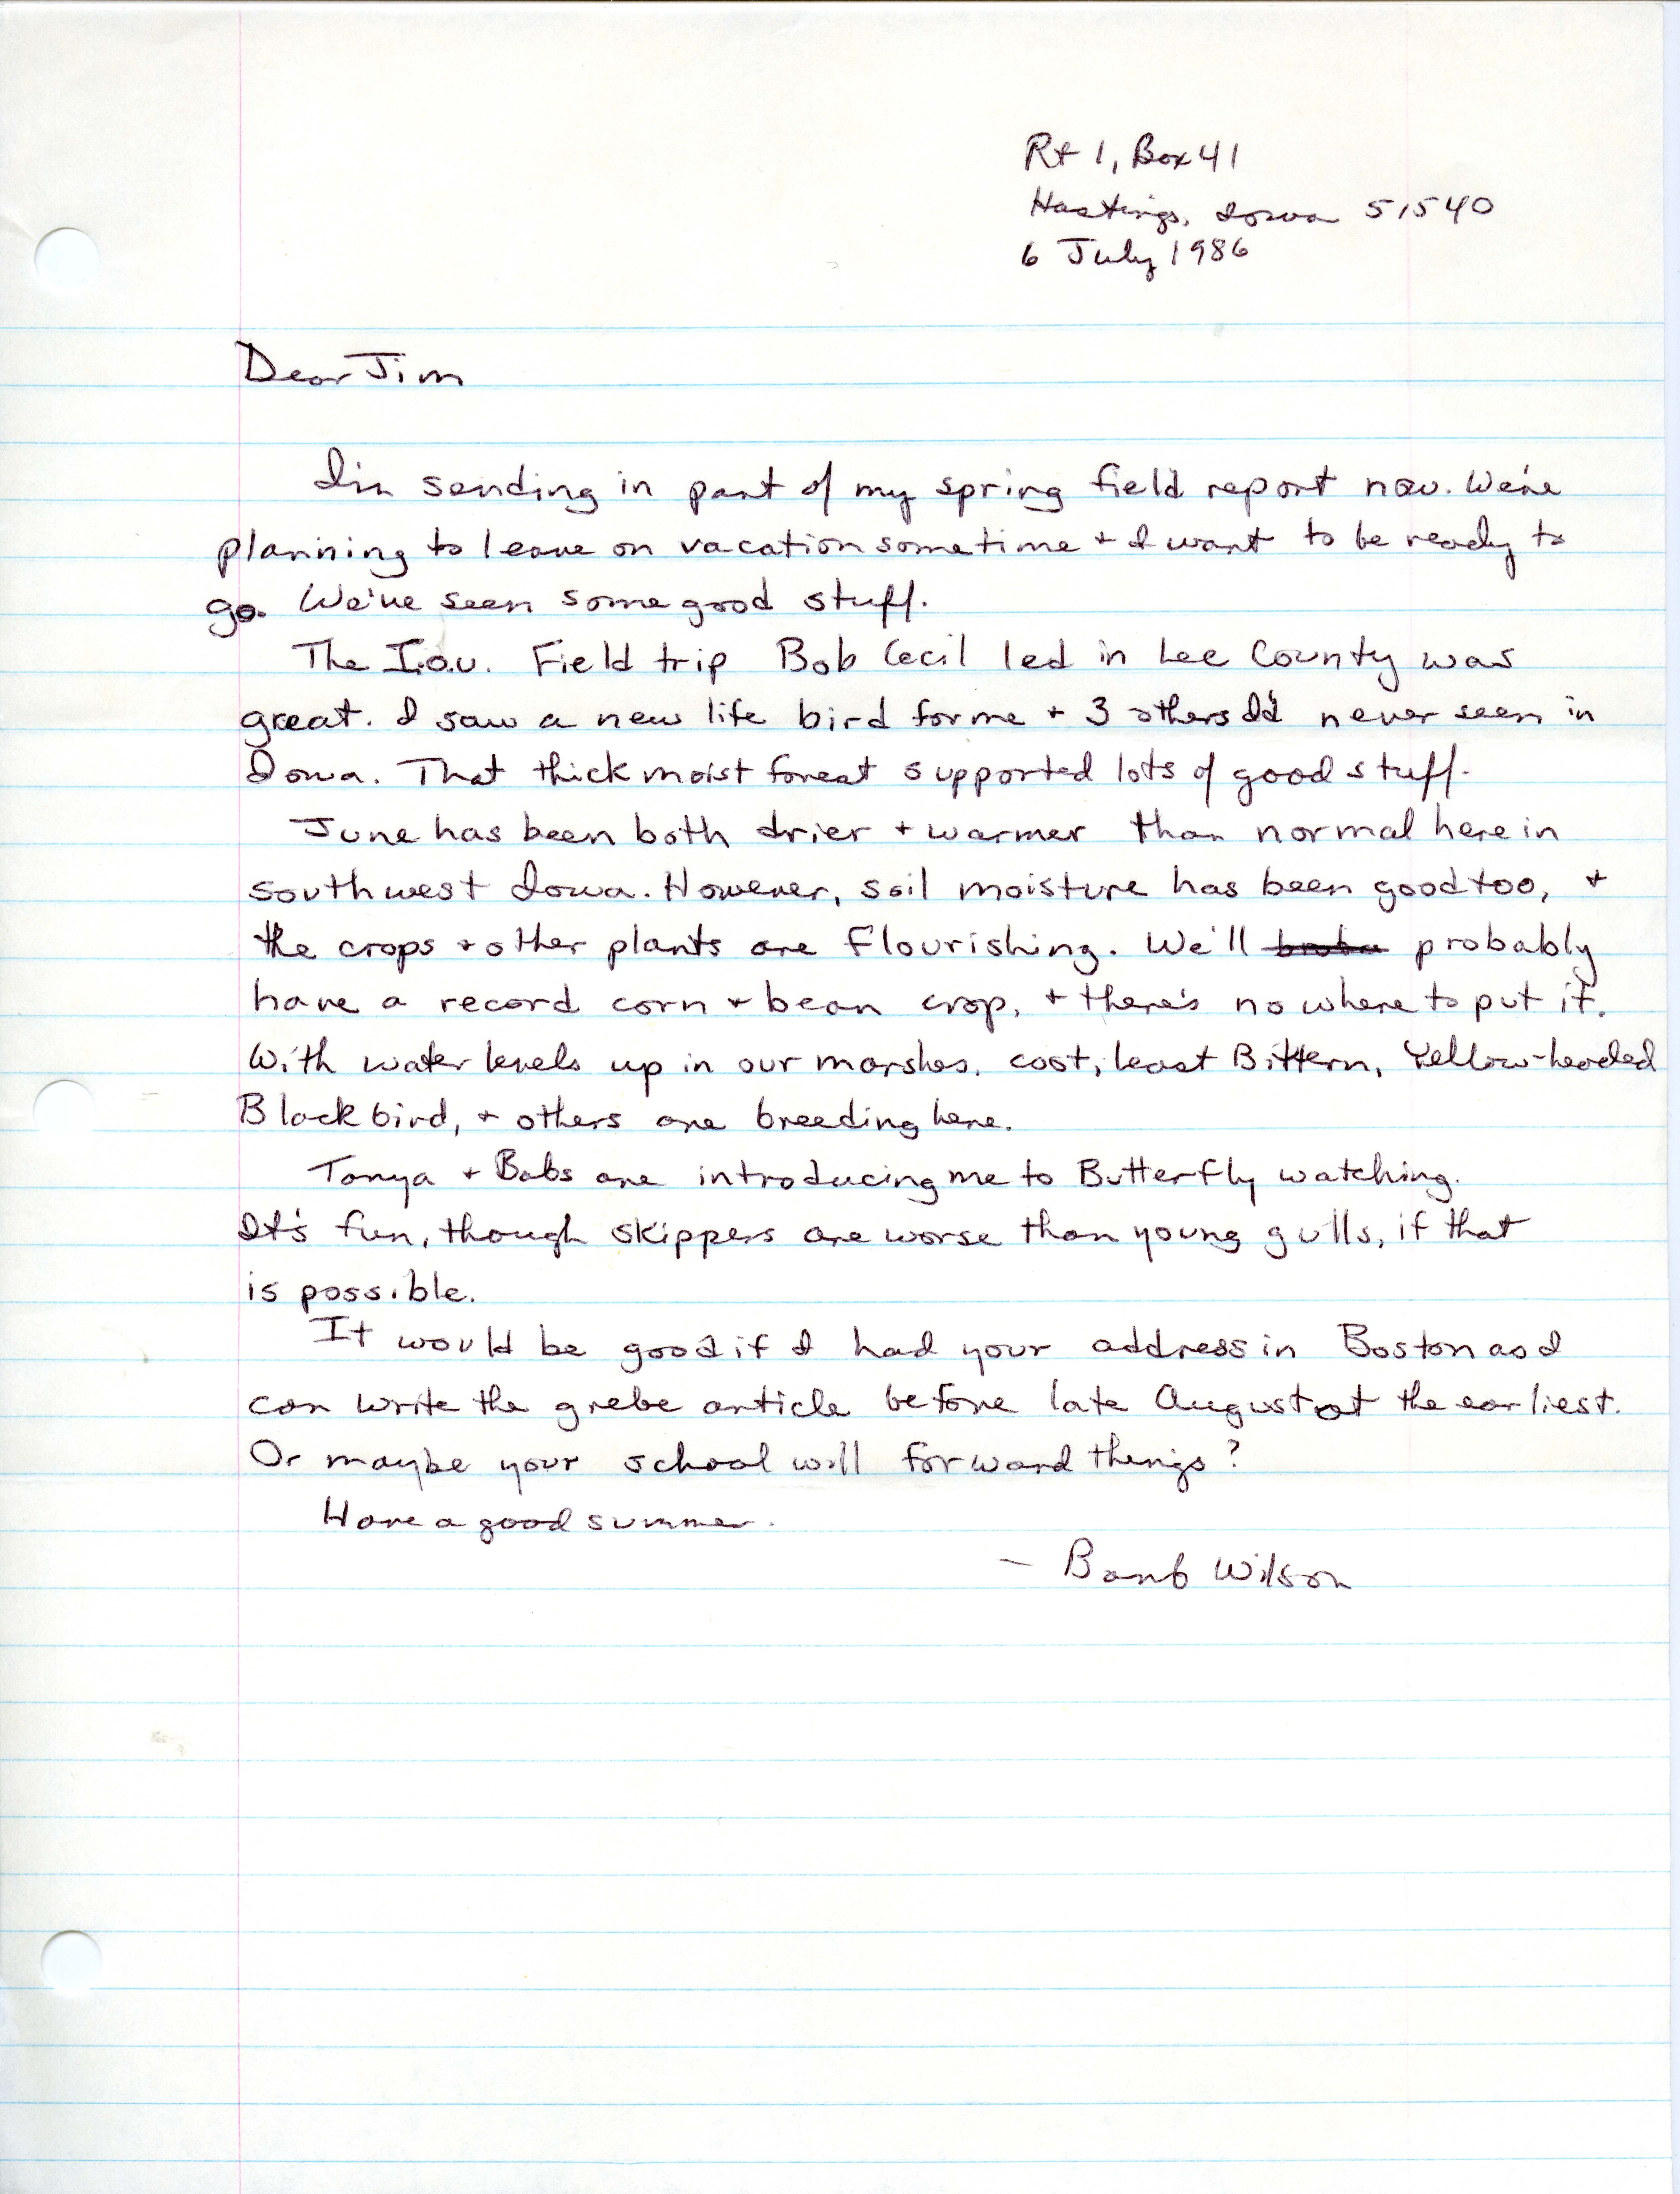 Field notes contributed by Barbara L. Wilson, July 6, 1986